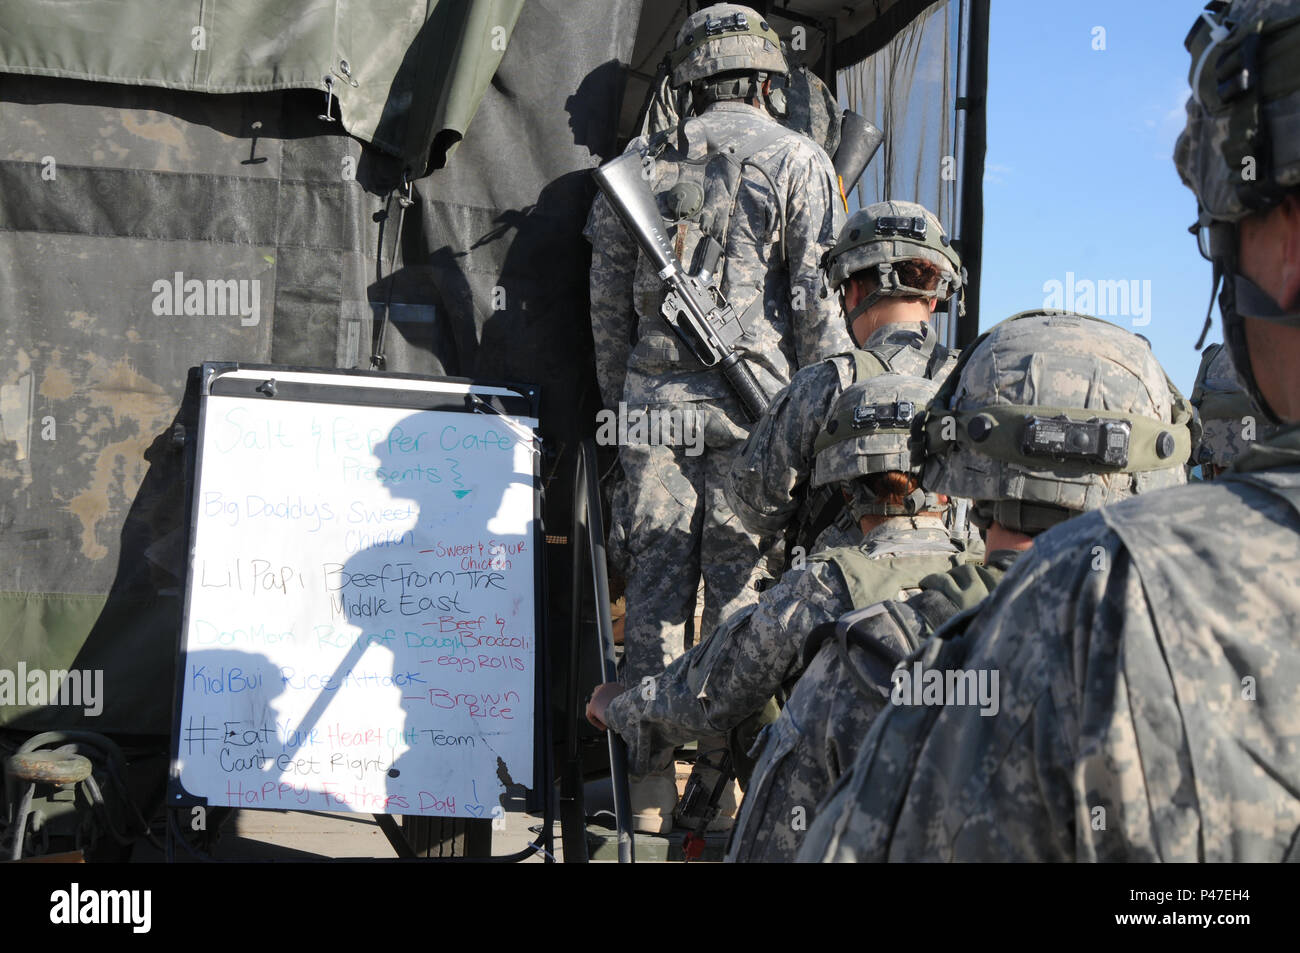 North Carolina Army National Guard soldiers anxiously wait in line outside the Mobile Kitchen Trailers (Salt and Pepper Café) for evening “chow” at the Logistics Support Area Forward Operating Base Santa Fe, Fort Irwin, California during the 16-07 National Training Center (NTC) rotation on June 19, 2016.  The MKT uses a four-man crew to set up and if doubled can serve over 500 meals per day.  The NTC is a training facility designed to simulate real-life combat scenarios testing warriors’ readiness utilizing their military occupational specialty in a high-up-tempo environment.  (U.S. Army Natio Stock Photo